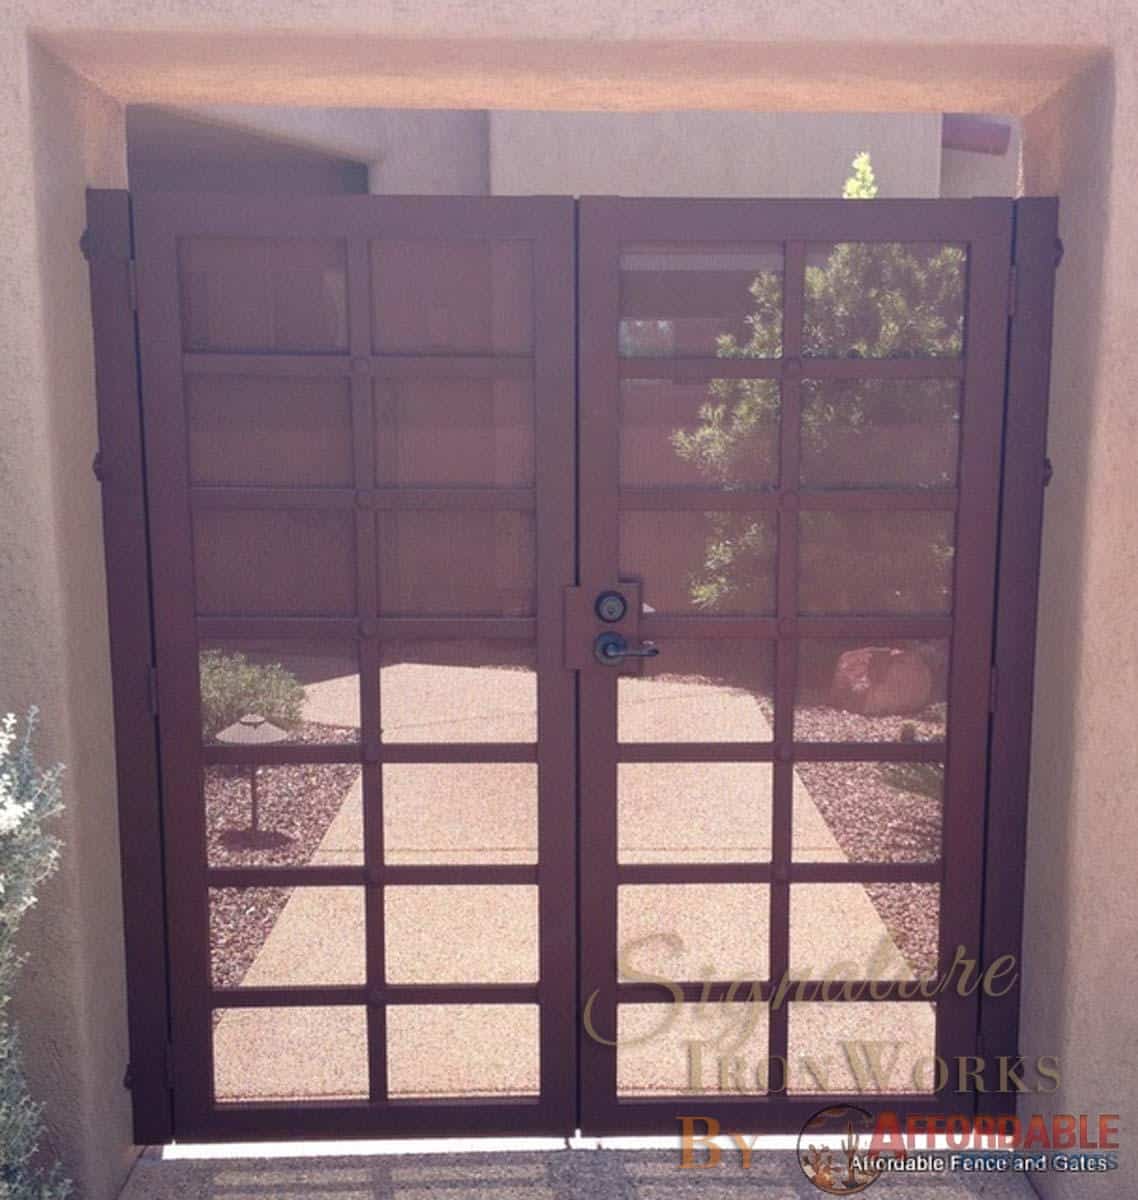 Double wrought iron gate with lattice structure, metal backing, lock and decorative clavos 001 - Installed in Tucson